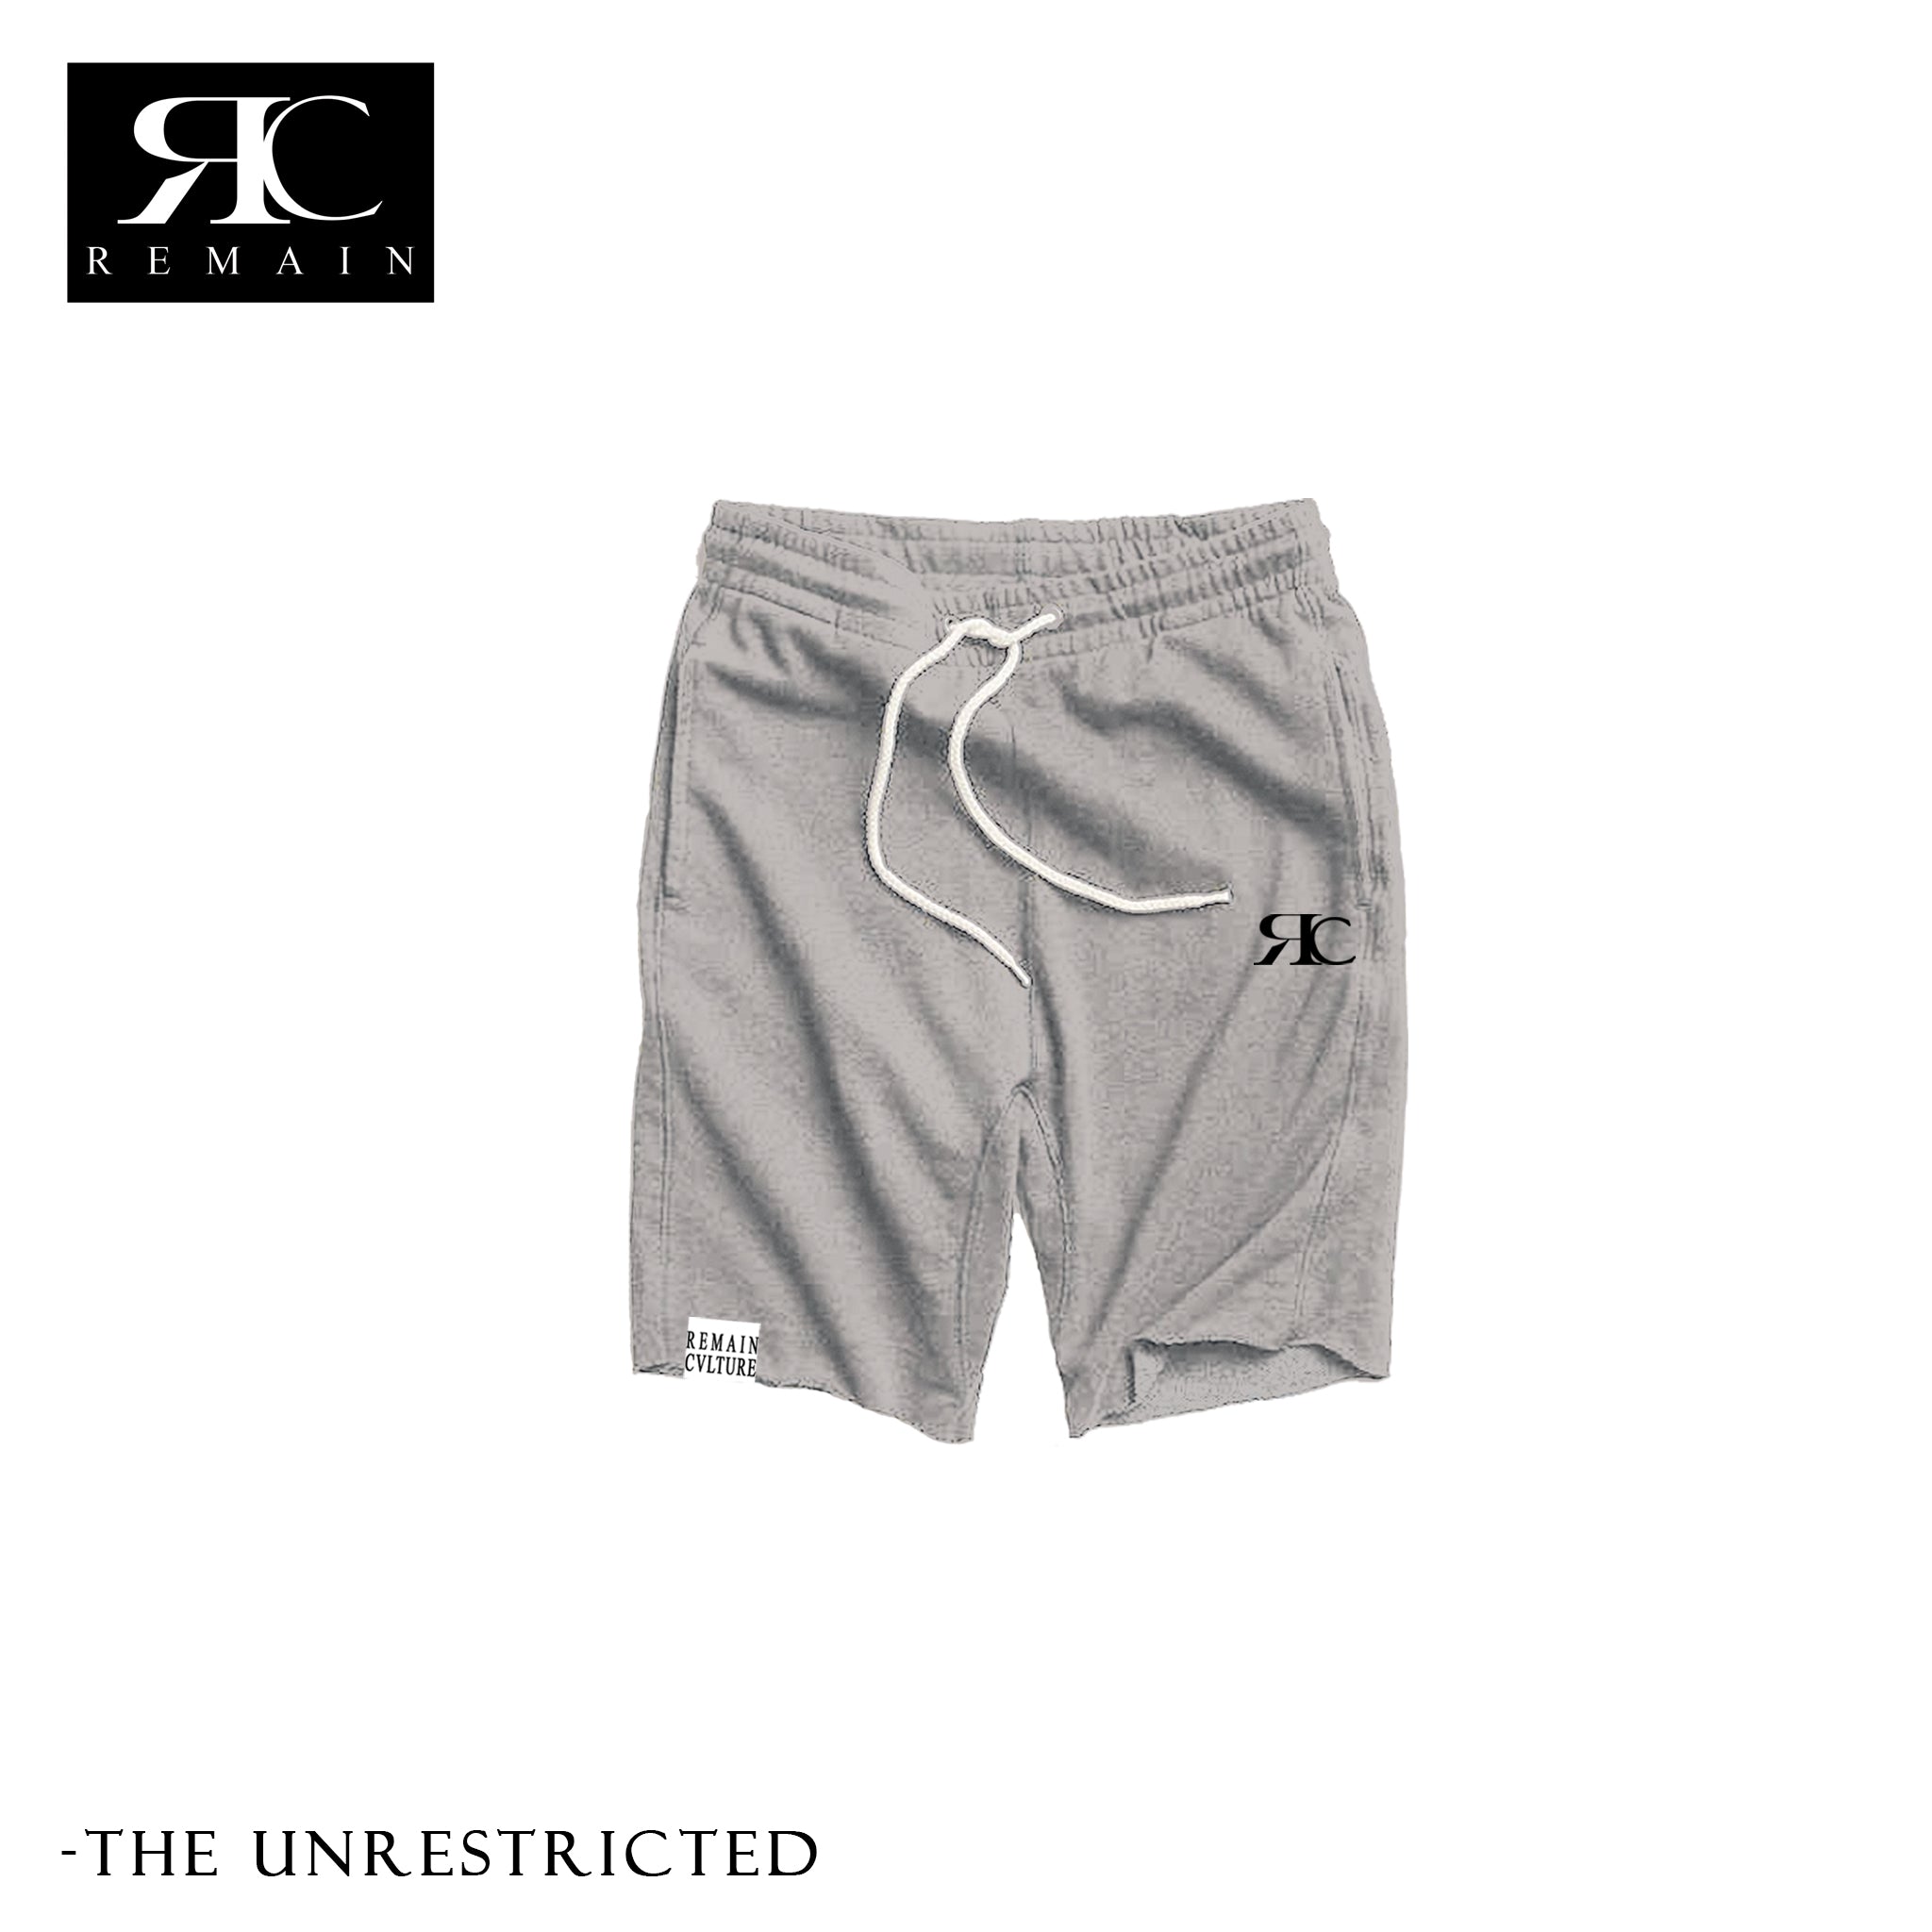 The Unrestricted Shorts